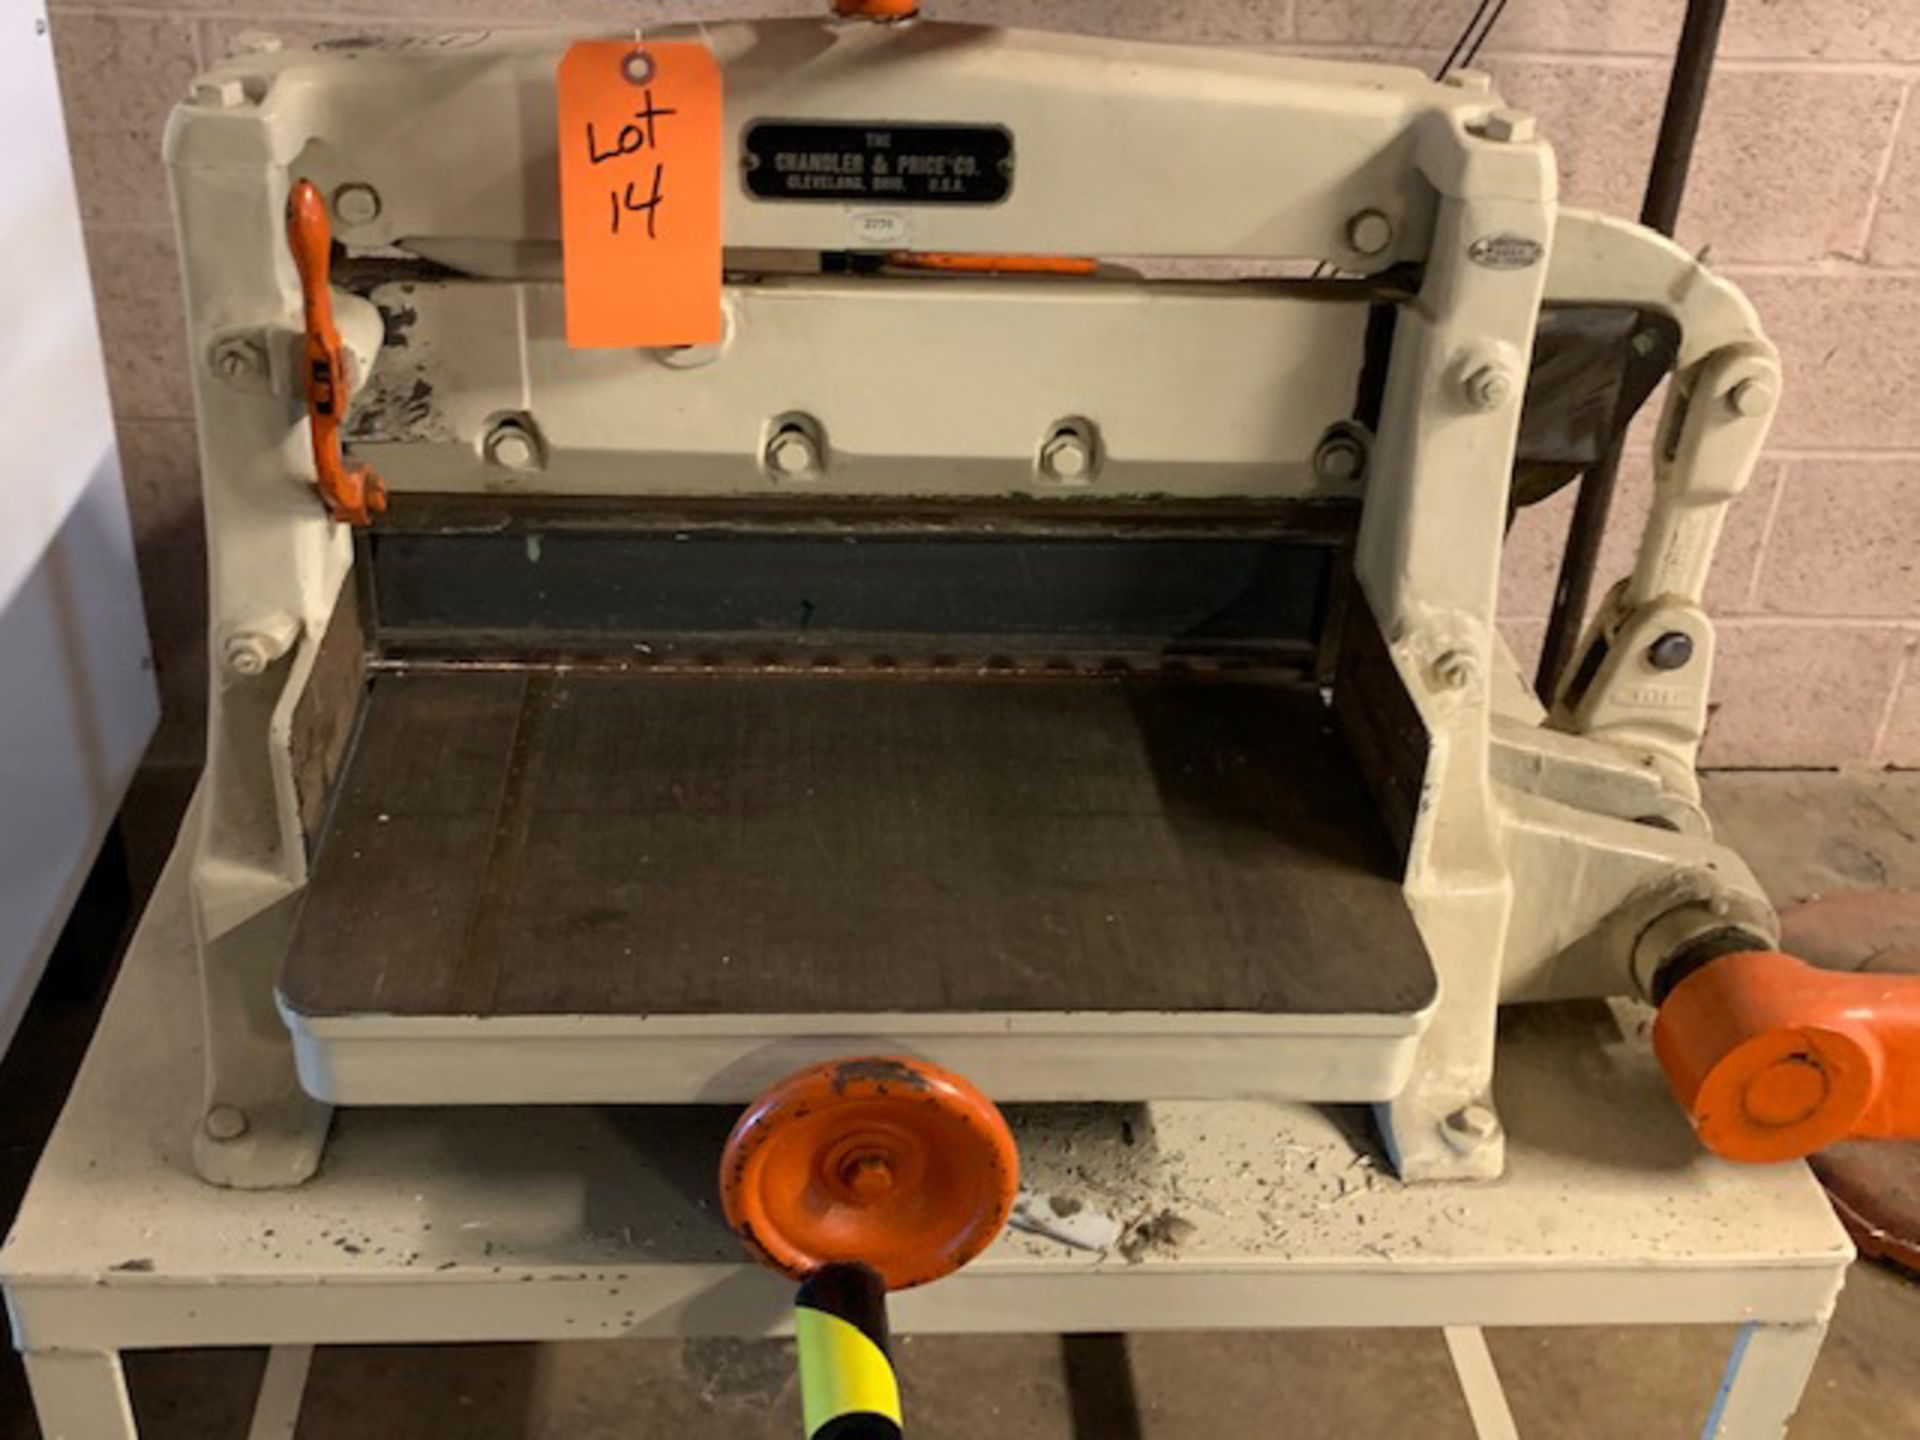 CHANDLER & PRICE MANUAL GUILLOTINE CUTTER WITH 2.5" OPENING [RIGGING FEES FOR LOT #14 - $50 USD PLUS